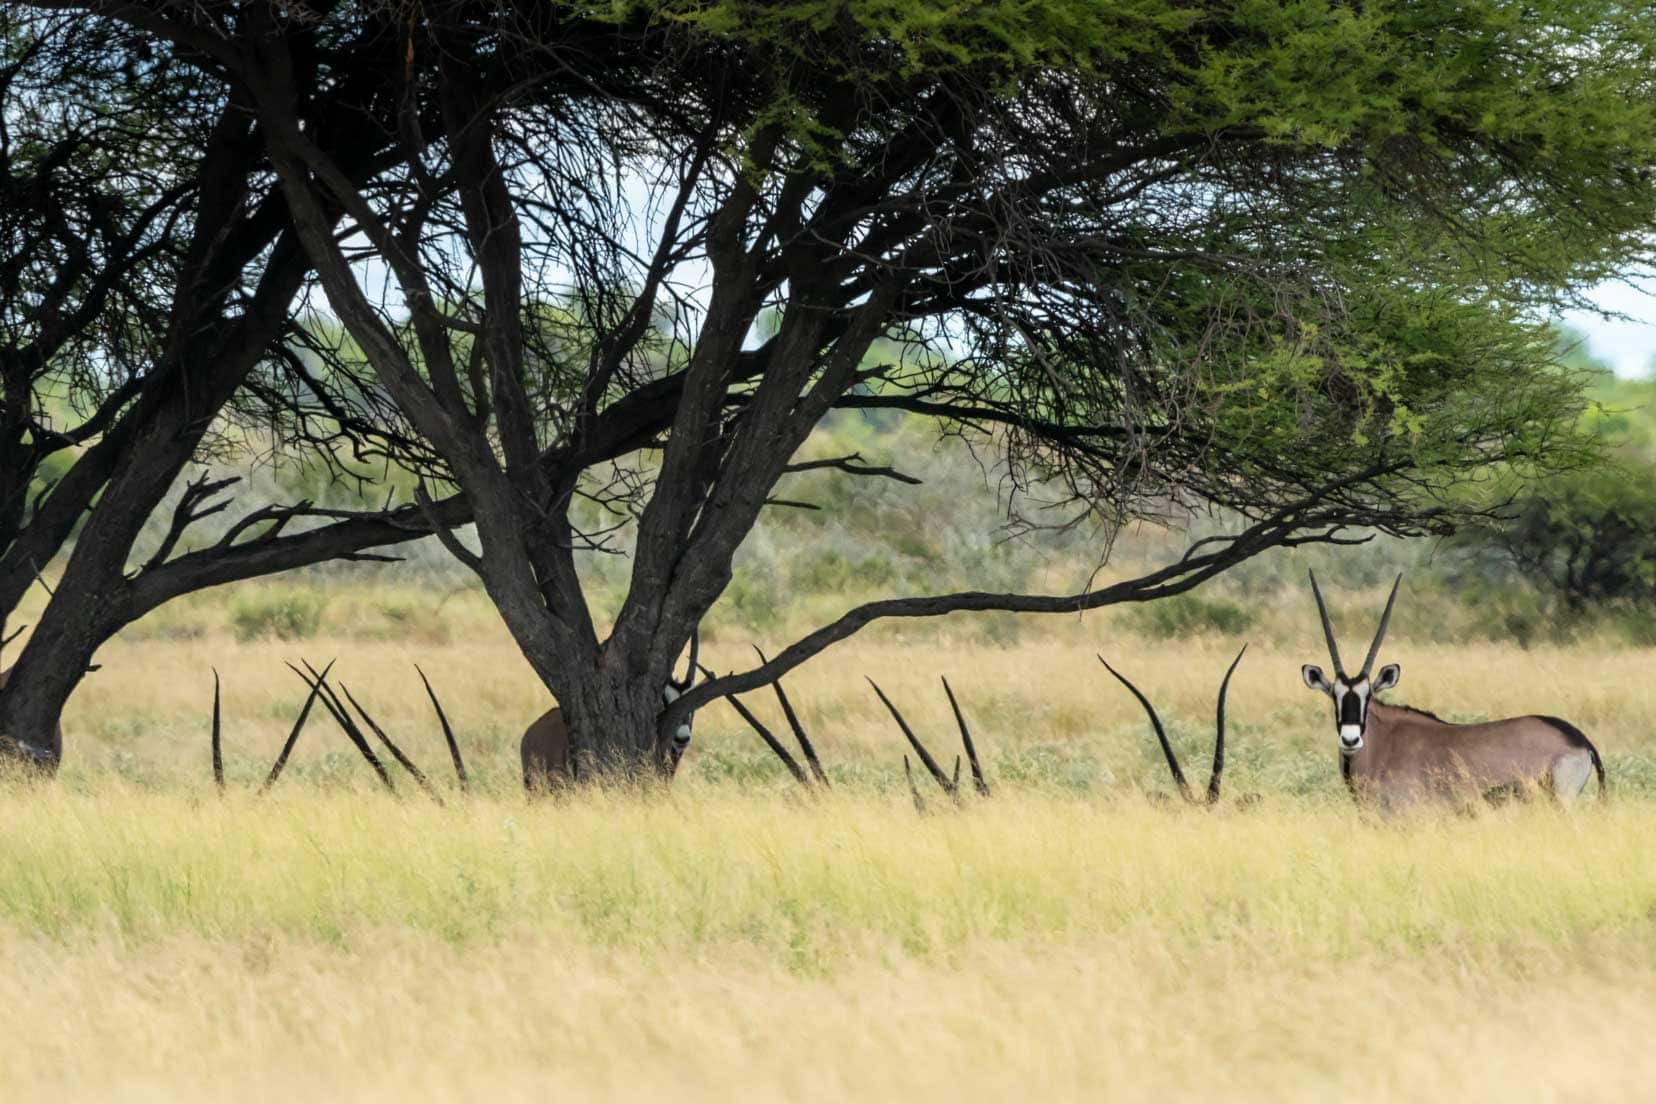 Gemsbok in grass with horns showing and one stood in full view